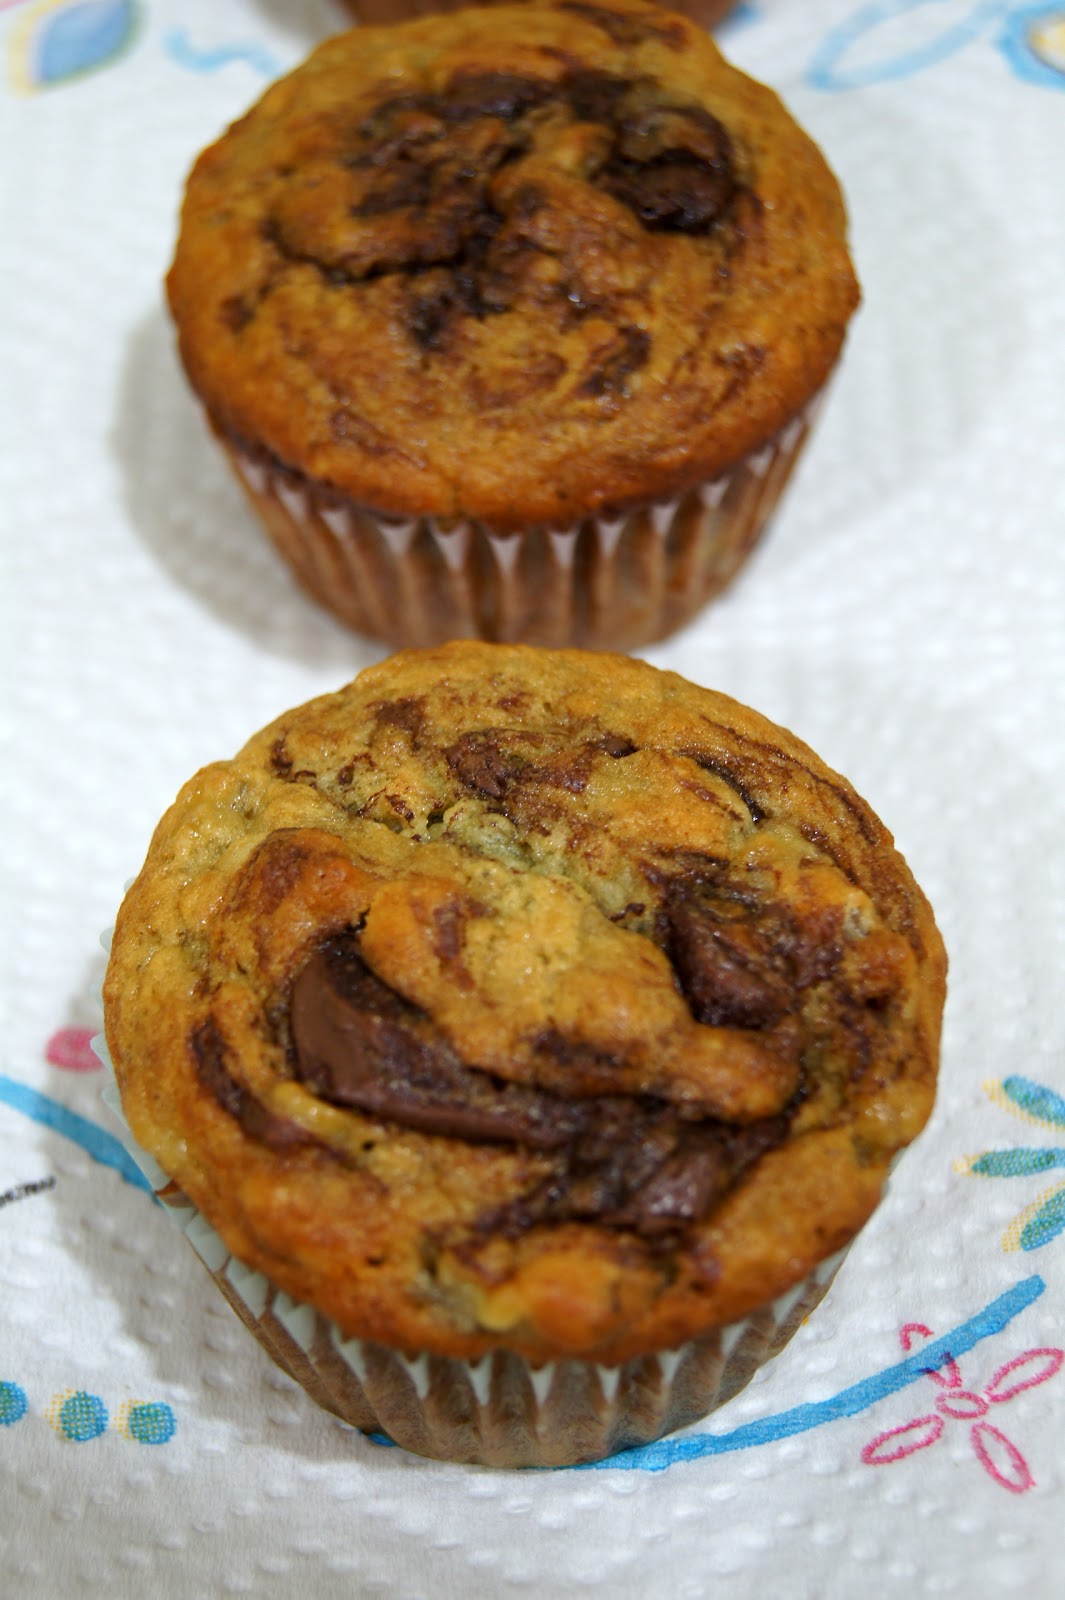 Simple Vegetarian Recipes: Eggless Nutella filled Banana muffins